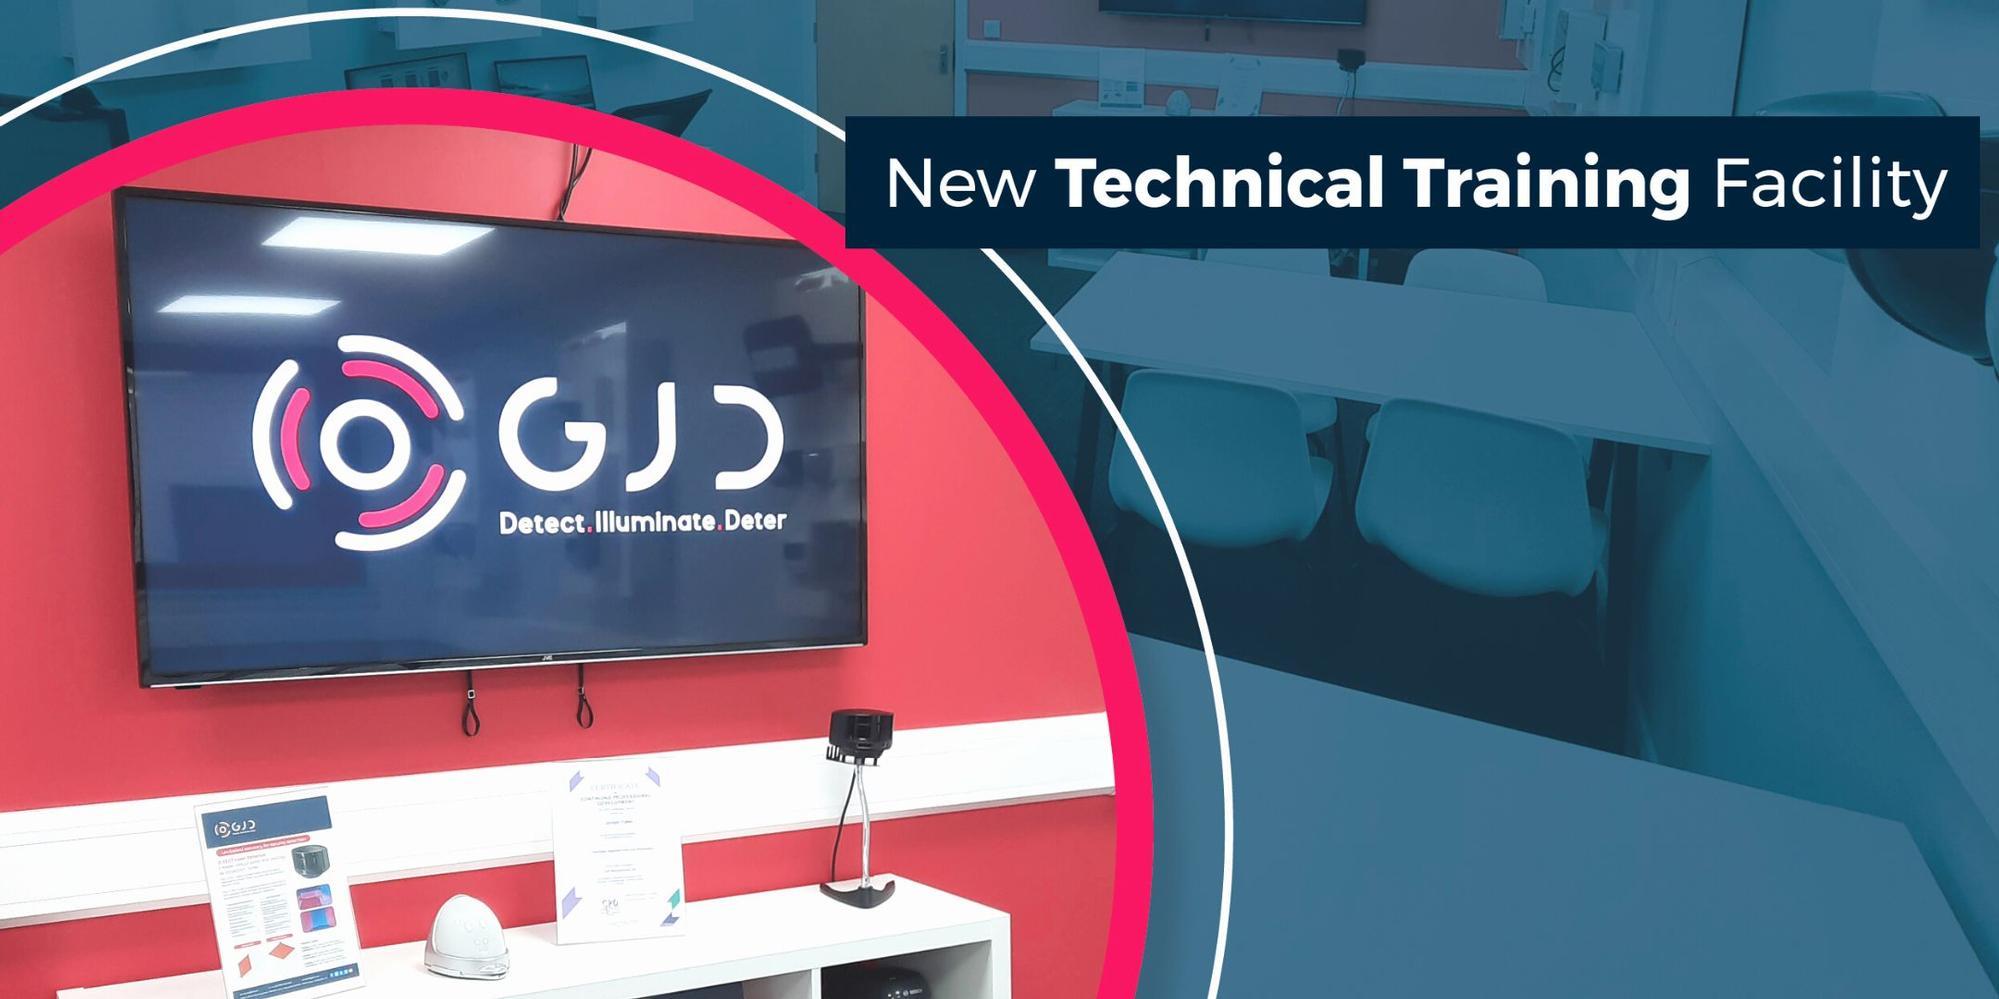 GJD launches new technical training facility for CPD Training